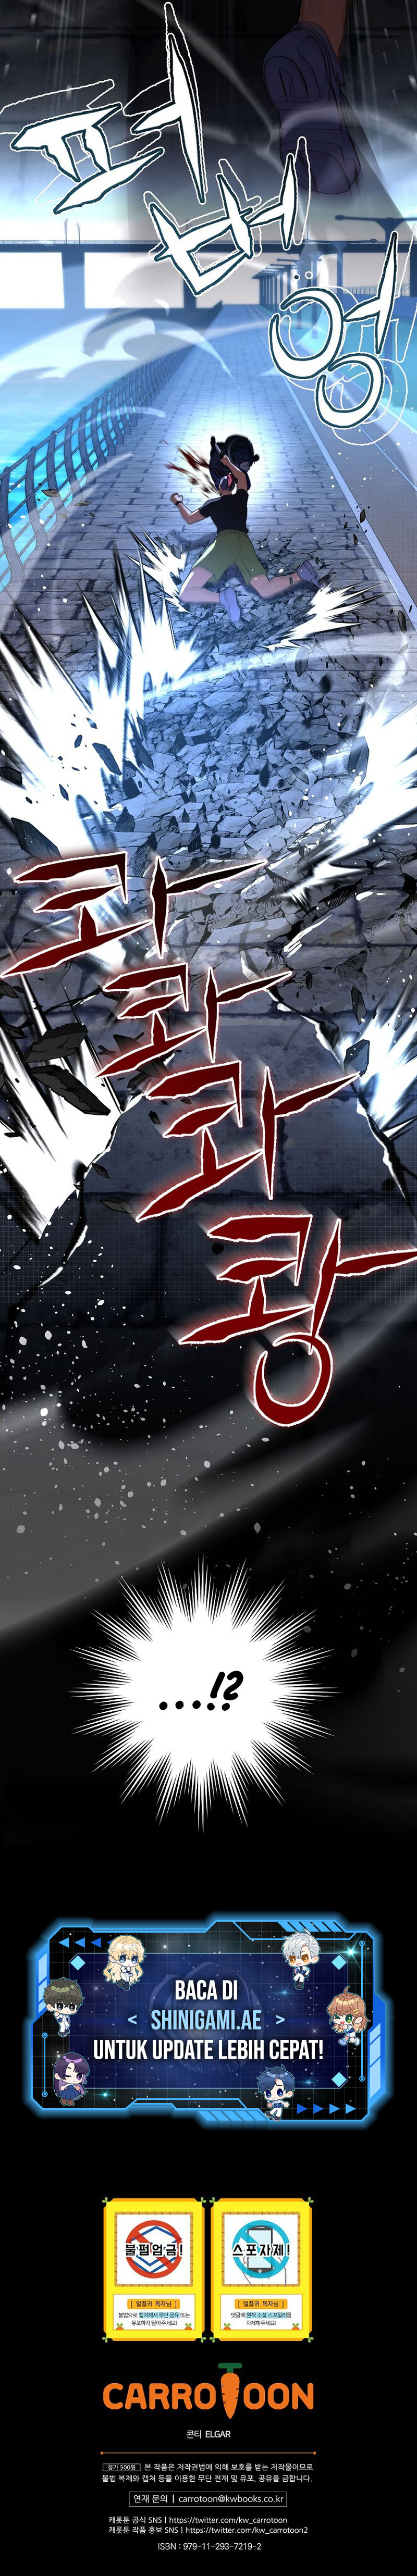 return-of-the-frozen-player Chapter 115